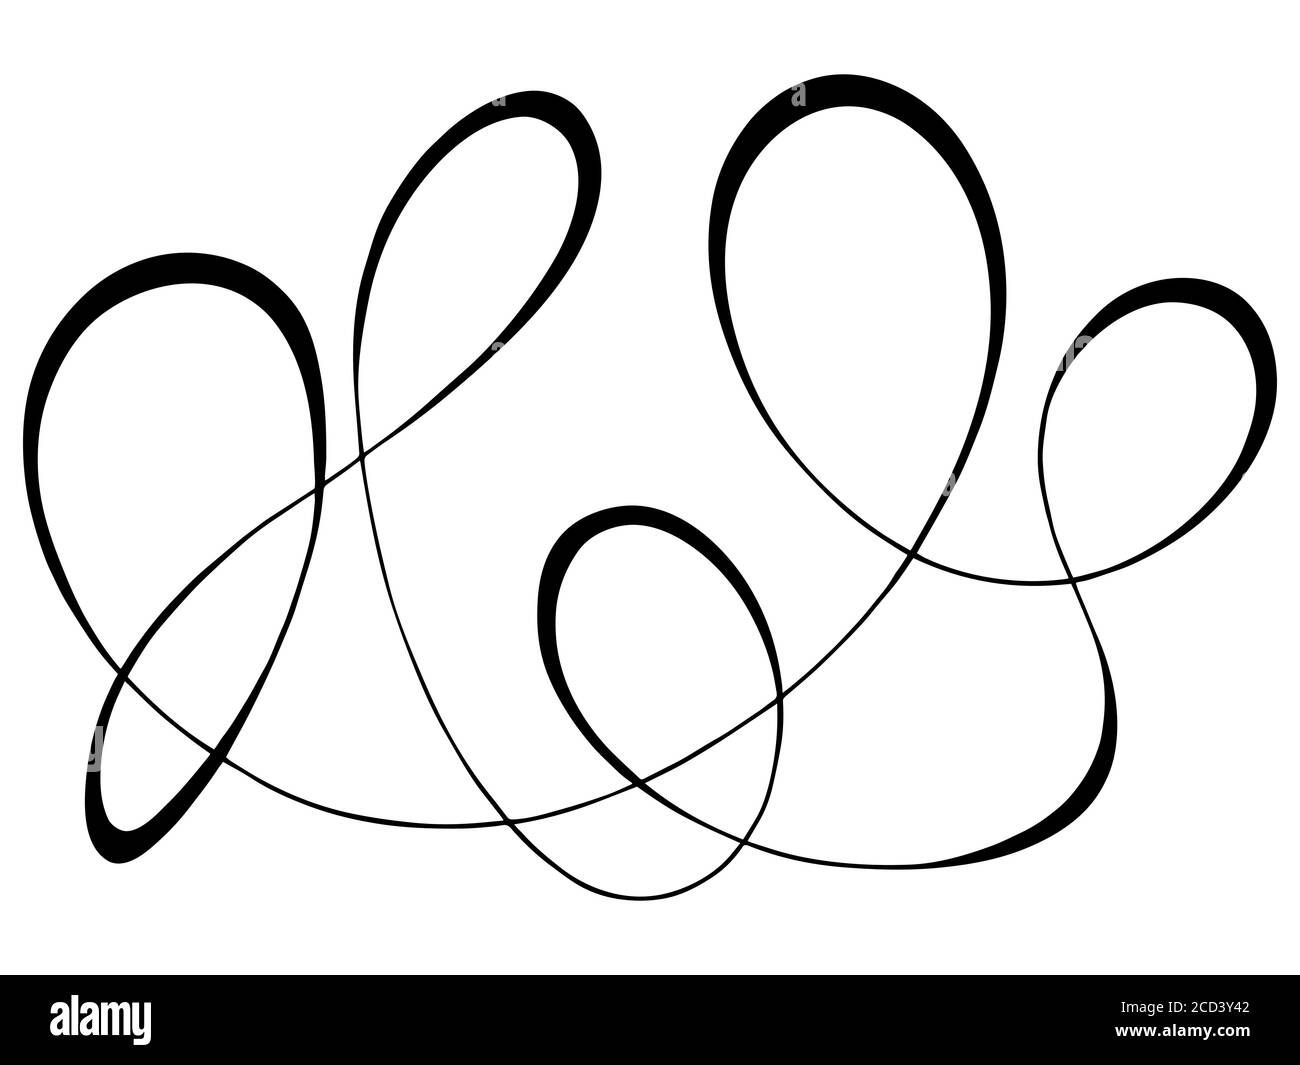 Abstract line graphic black white pattern background illustration vector Stock Vector